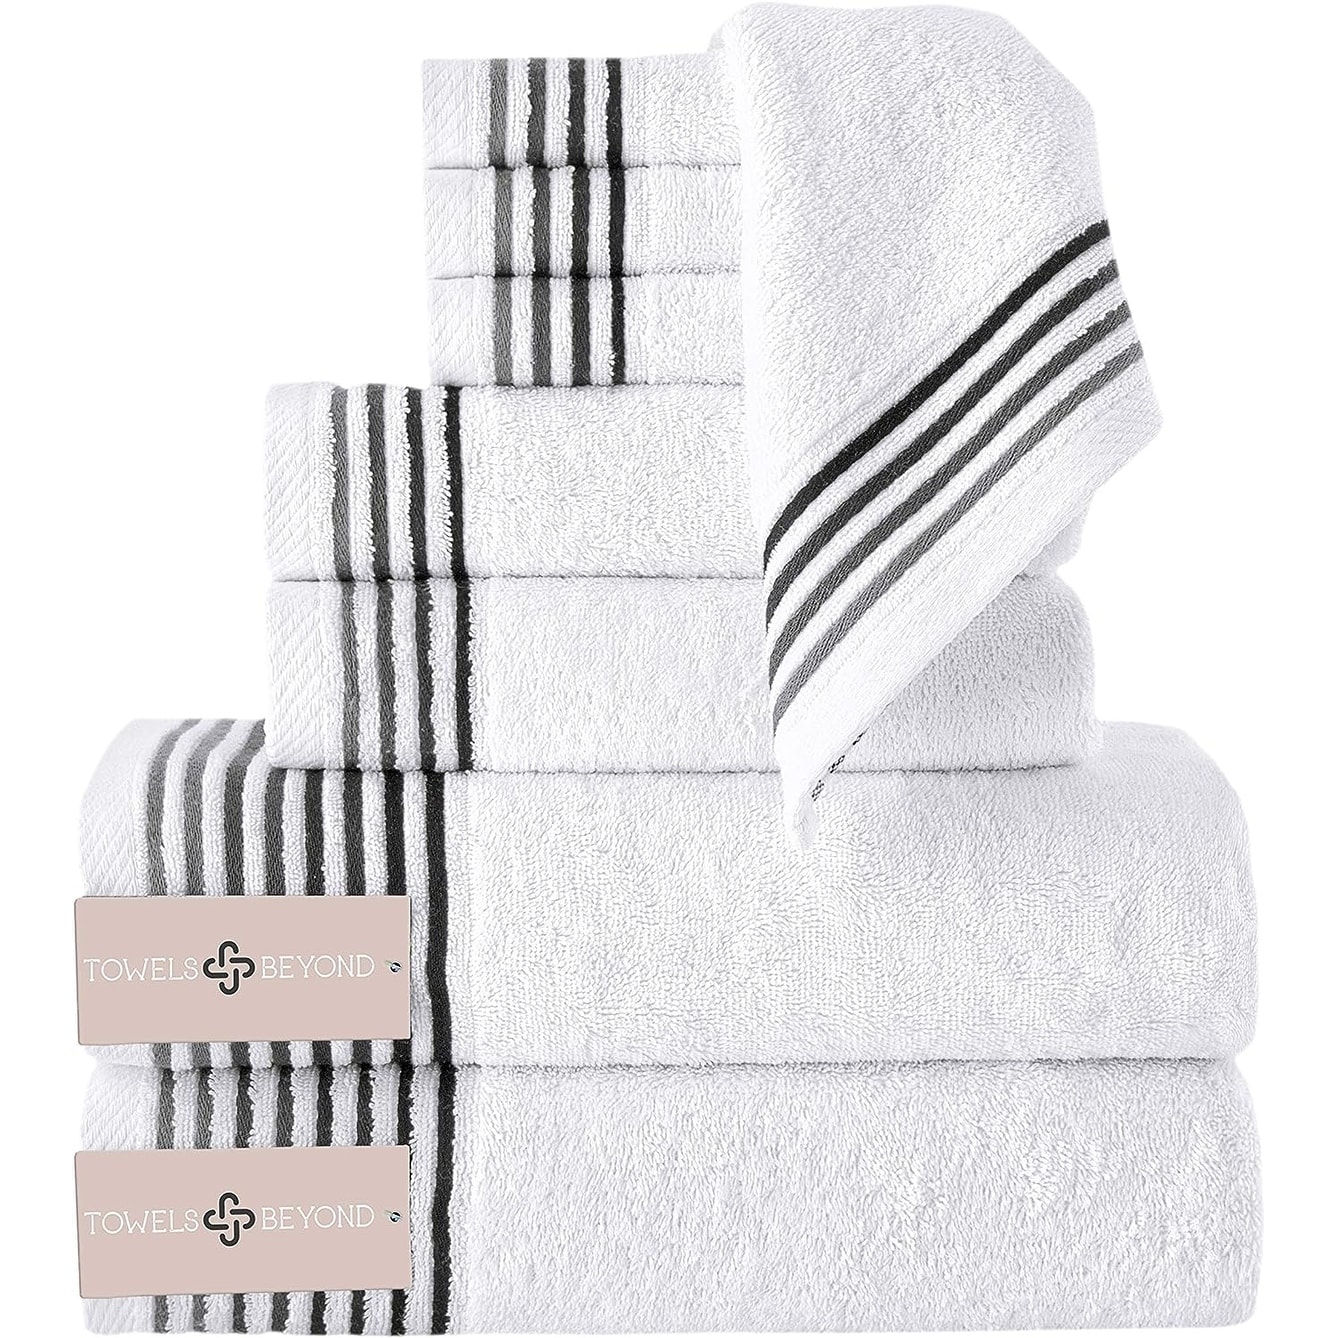 https://ak1.ostkcdn.com/images/products/is/images/direct/2d81d53305ddacaf0c66e9578c03cf3a4e30eaba/Royal-Turkish-Towels-Turkish-Cotton-Bamboo-Bathroom-Towel---Heavy-Duty-Soft-and-Luxurious-Towel-Set-%28Set-of-8%29.jpg